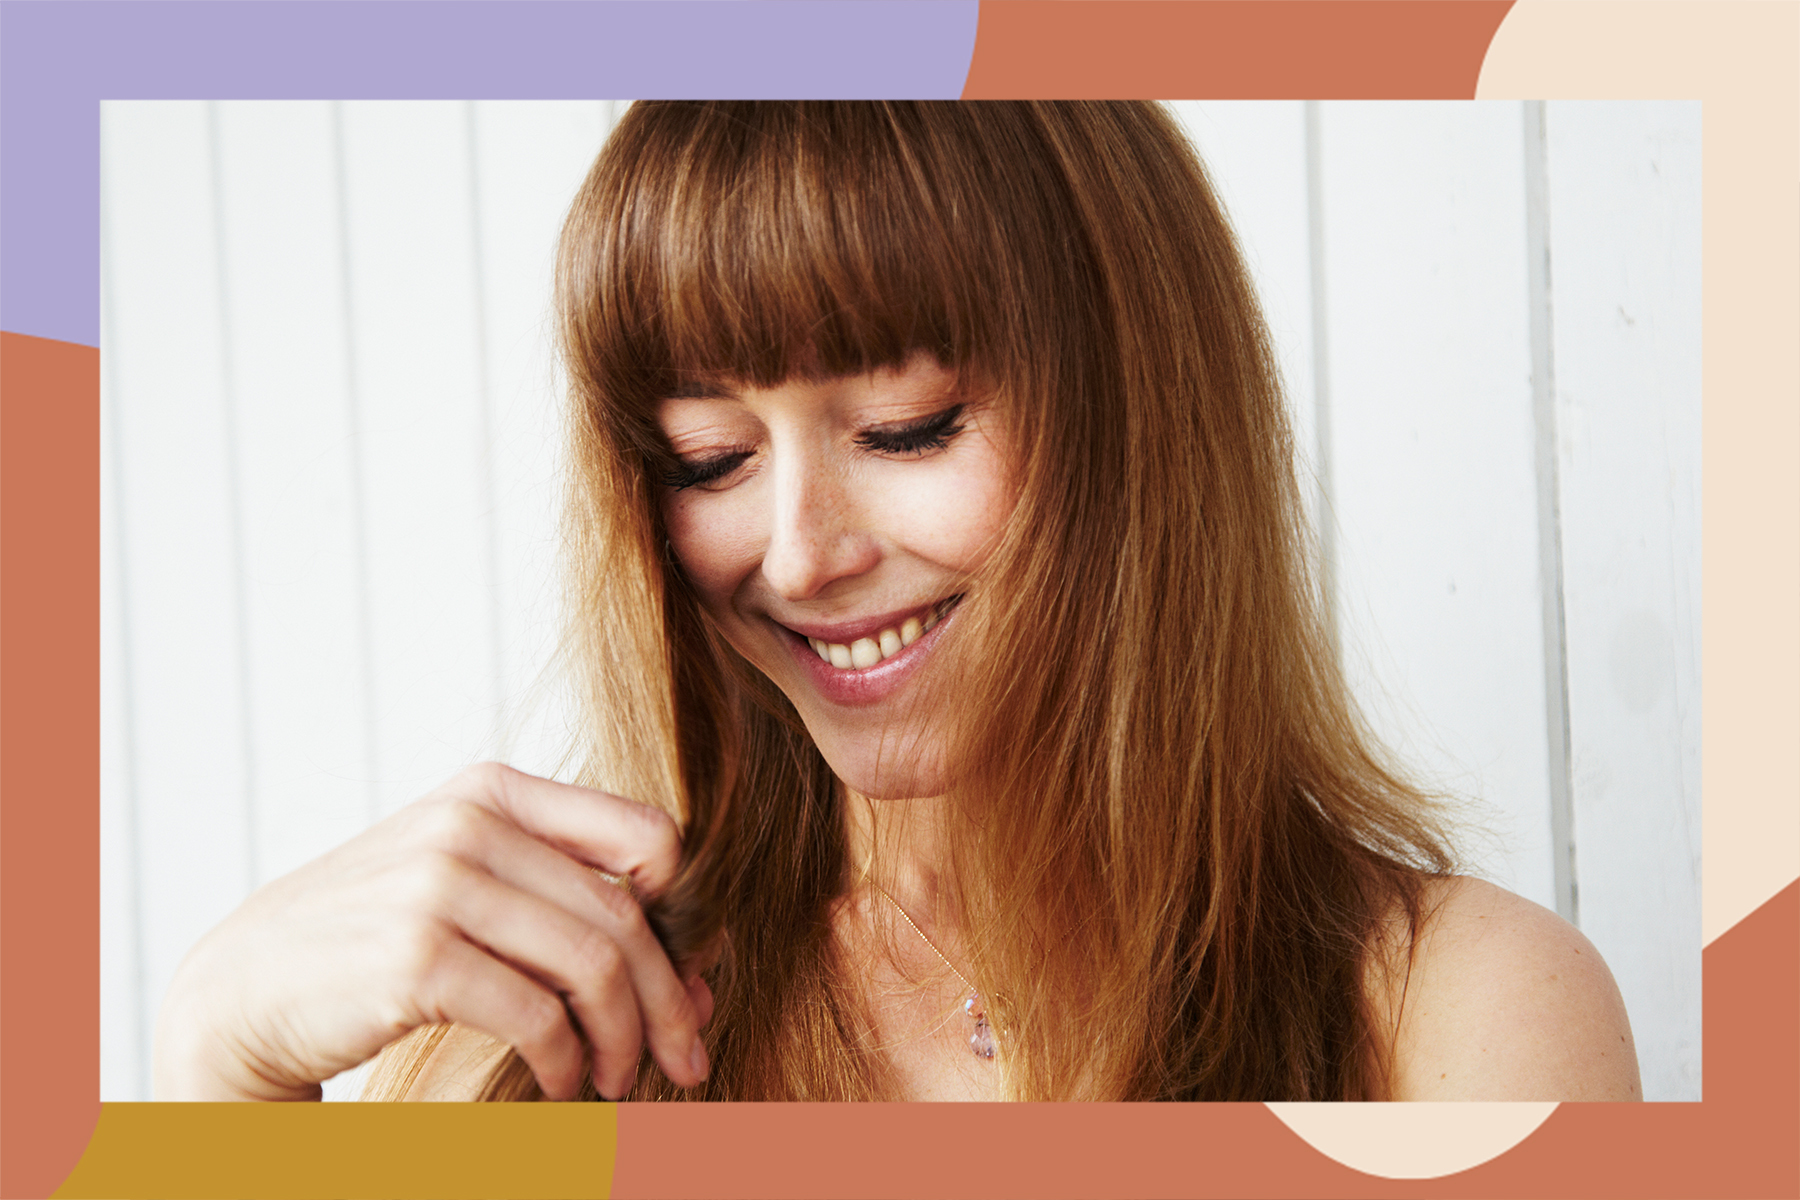 How to Style Bangs In the Summer, According to ProfessionalsHelloGiggles